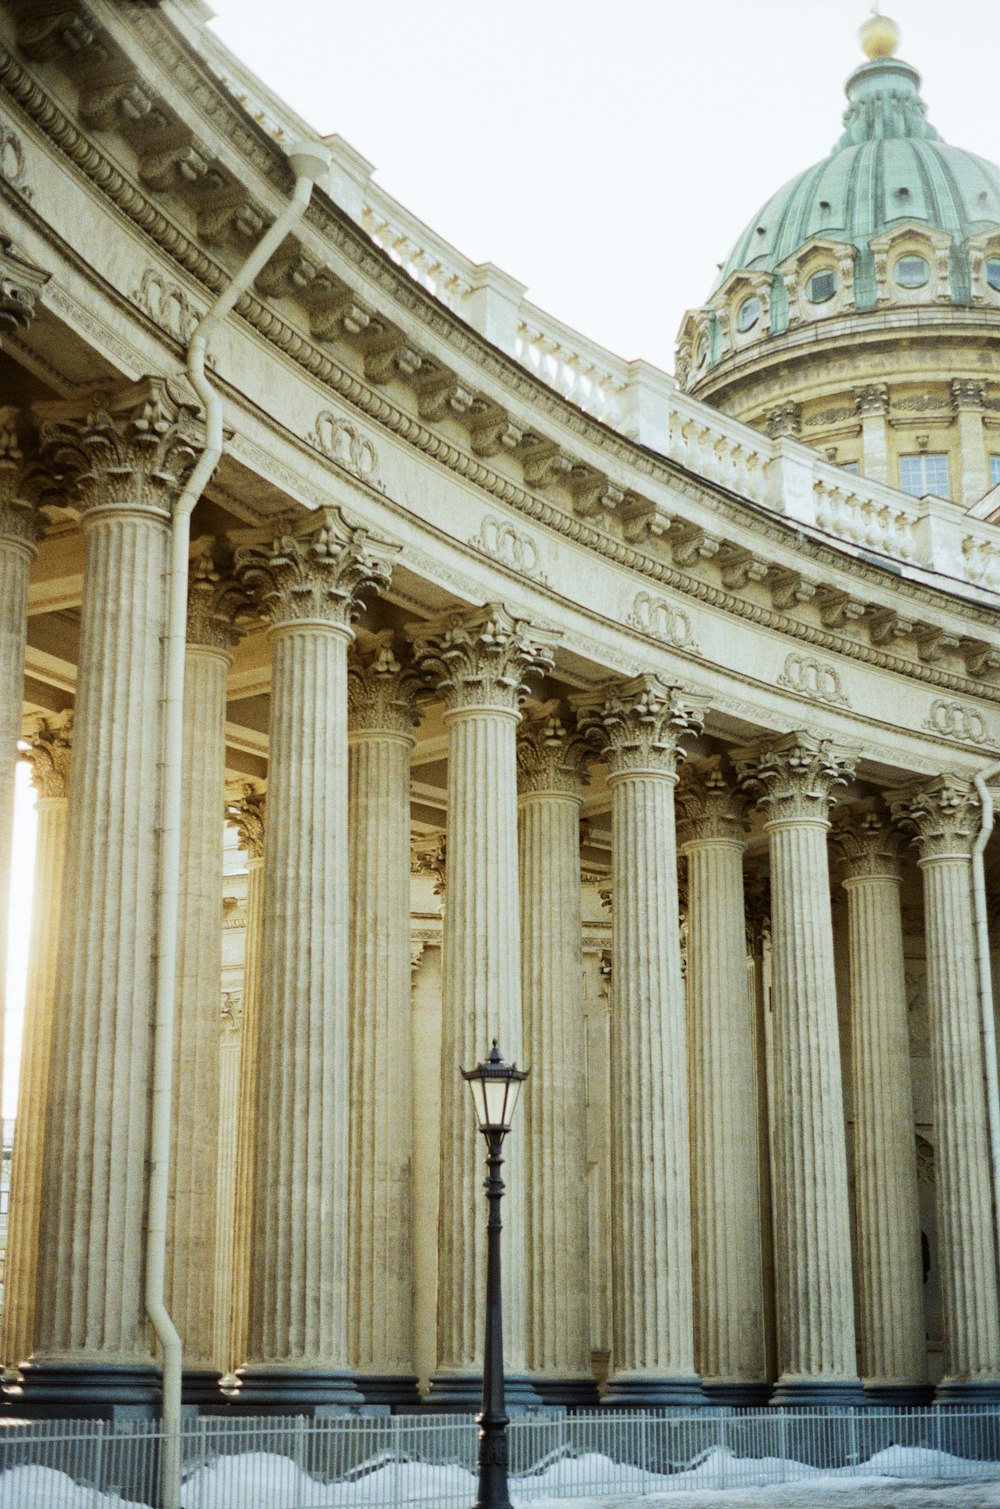 a large building with columns and a dome